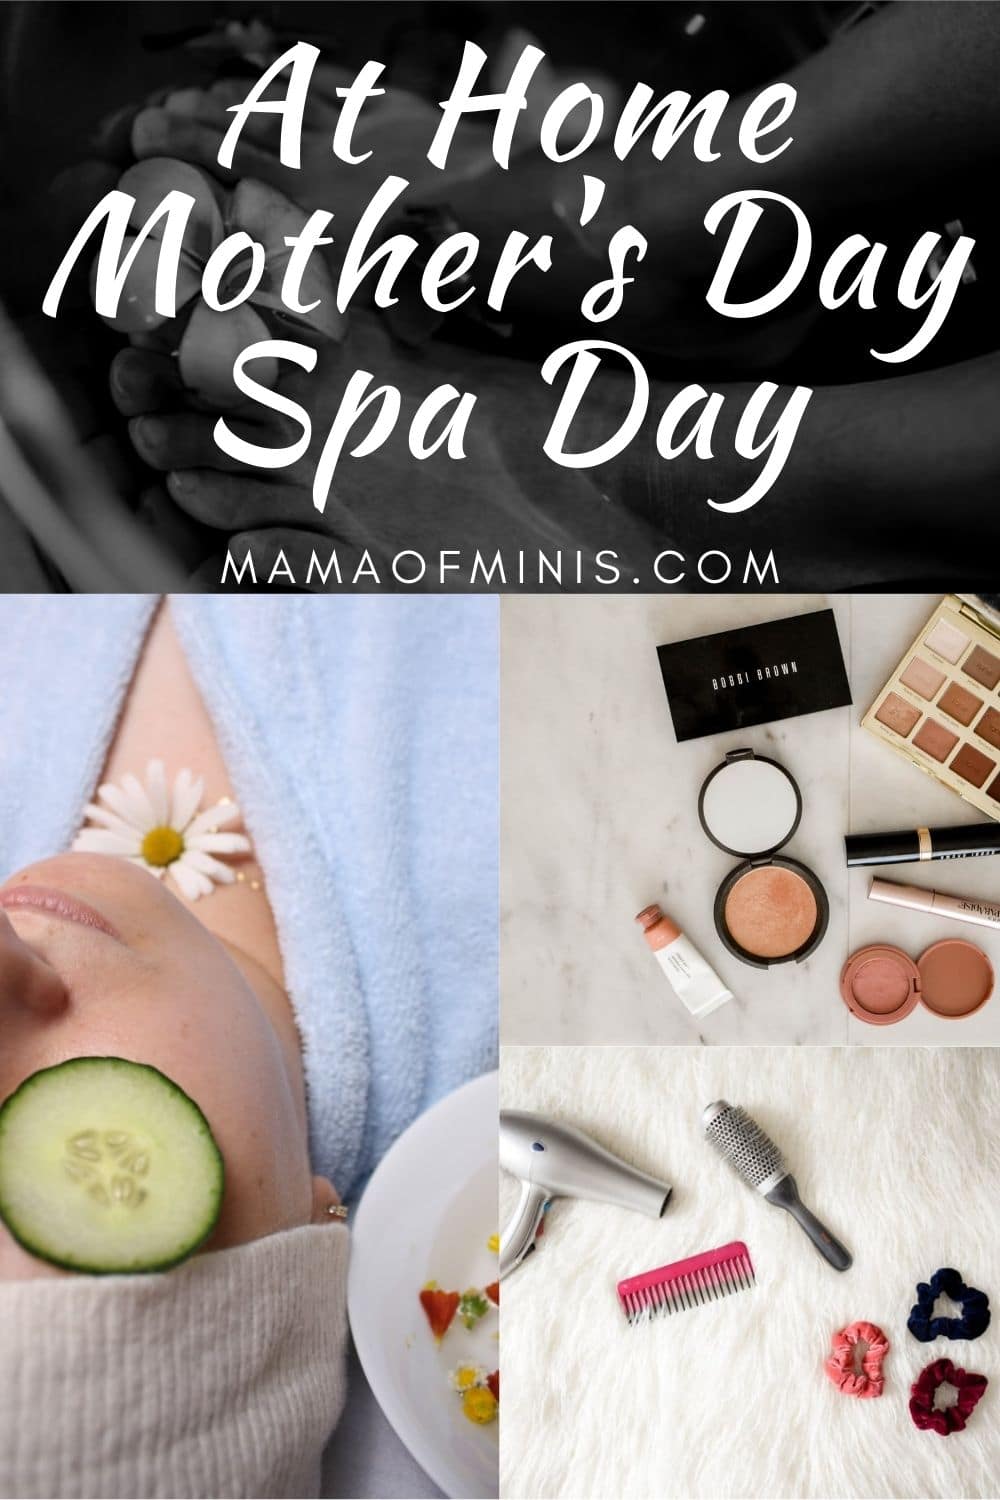 At Home Mothers Day Spa Day